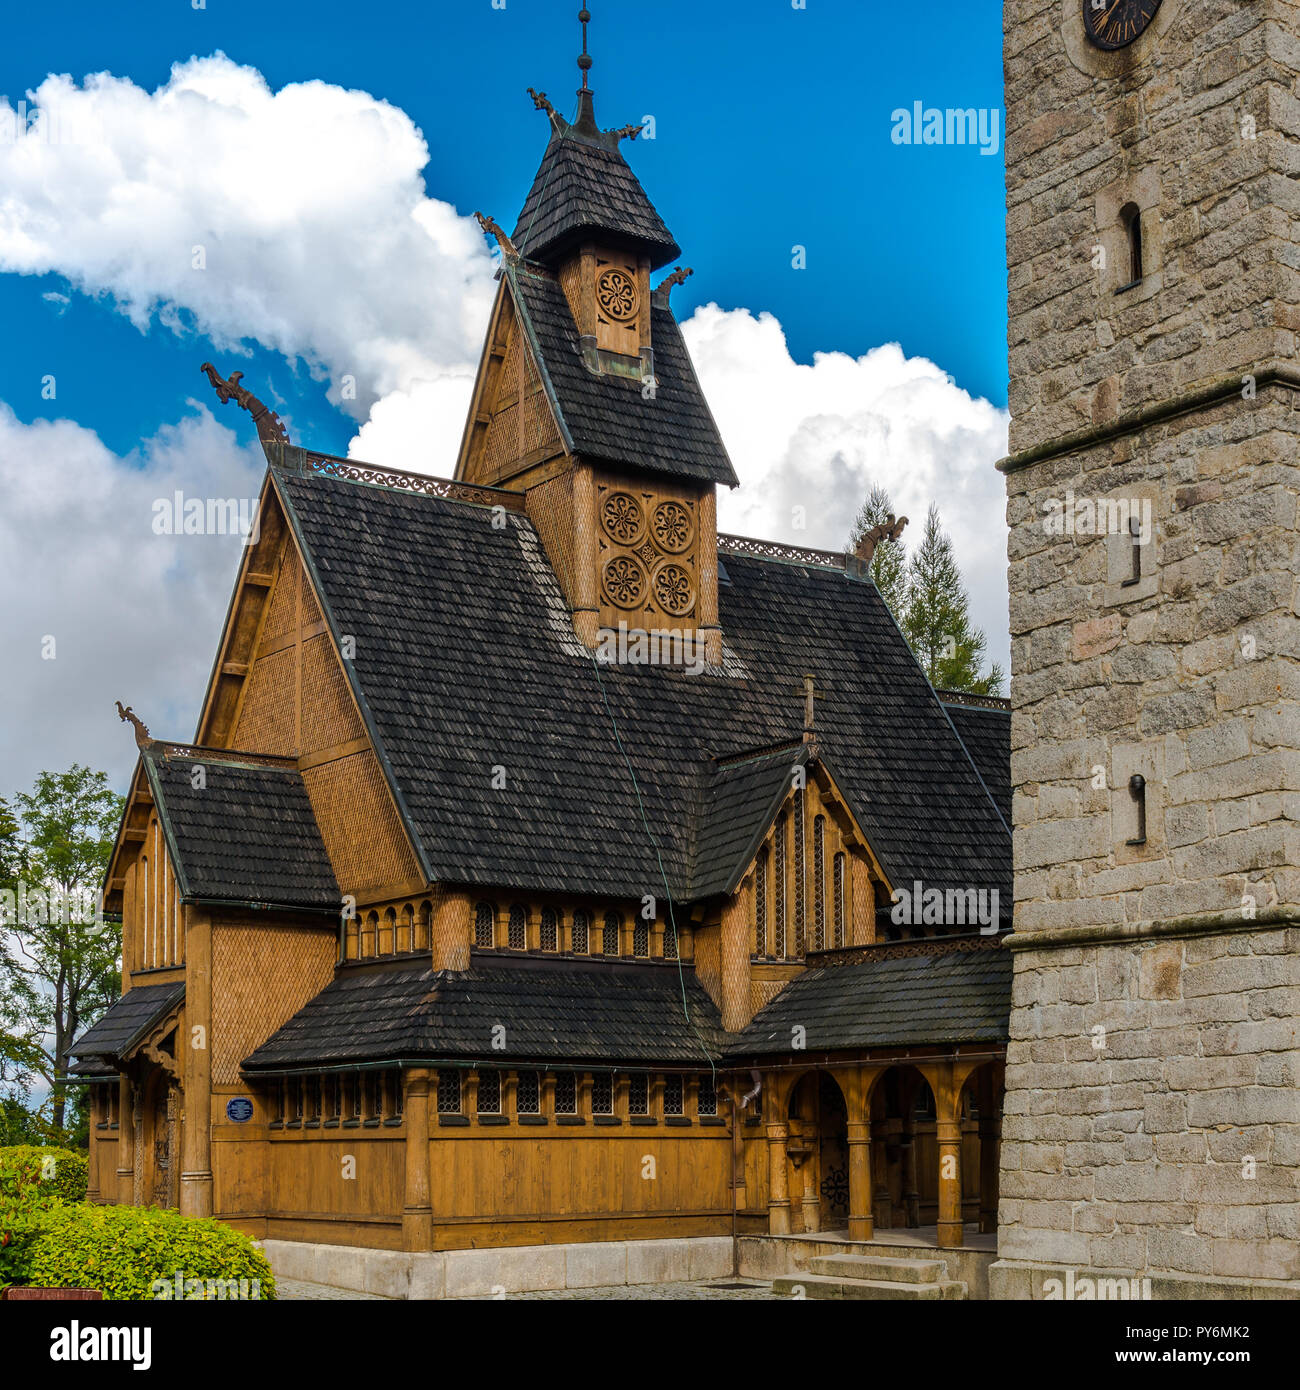 Vang stave church  , Poland , Karpacz. Historic, wooden church against the backdrop of mountains and blue sky Stock Photo